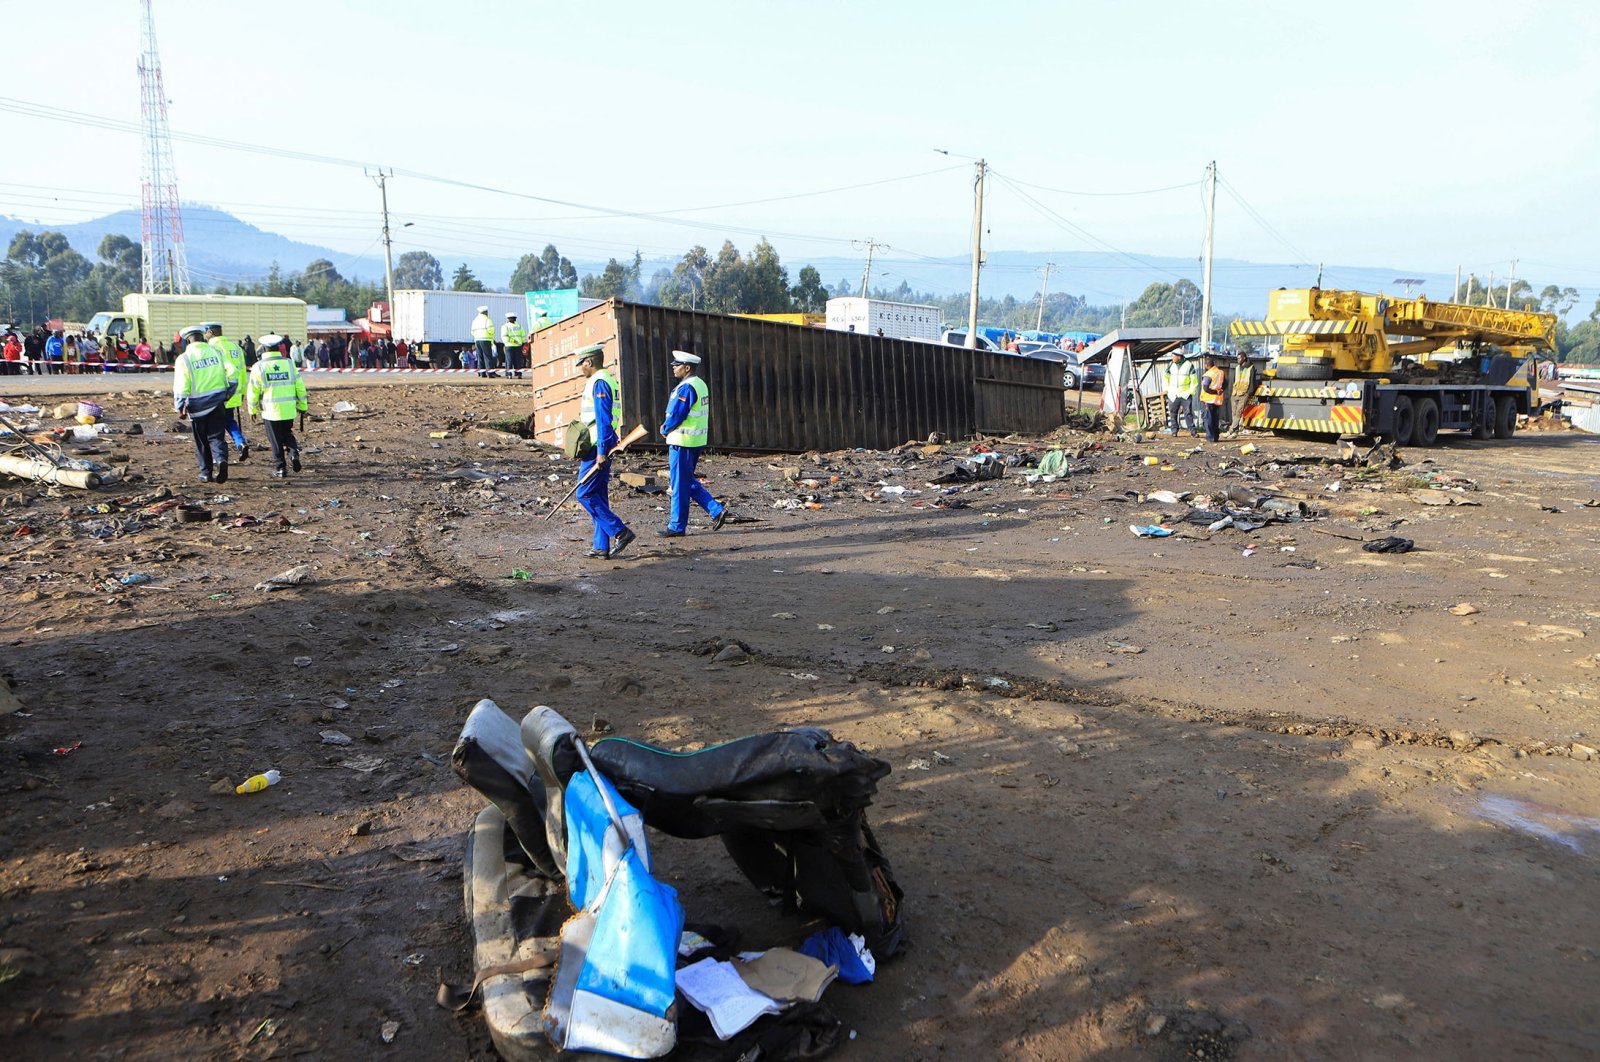 Road accident in Kenya claims 49 lives, search and rescue ongoing